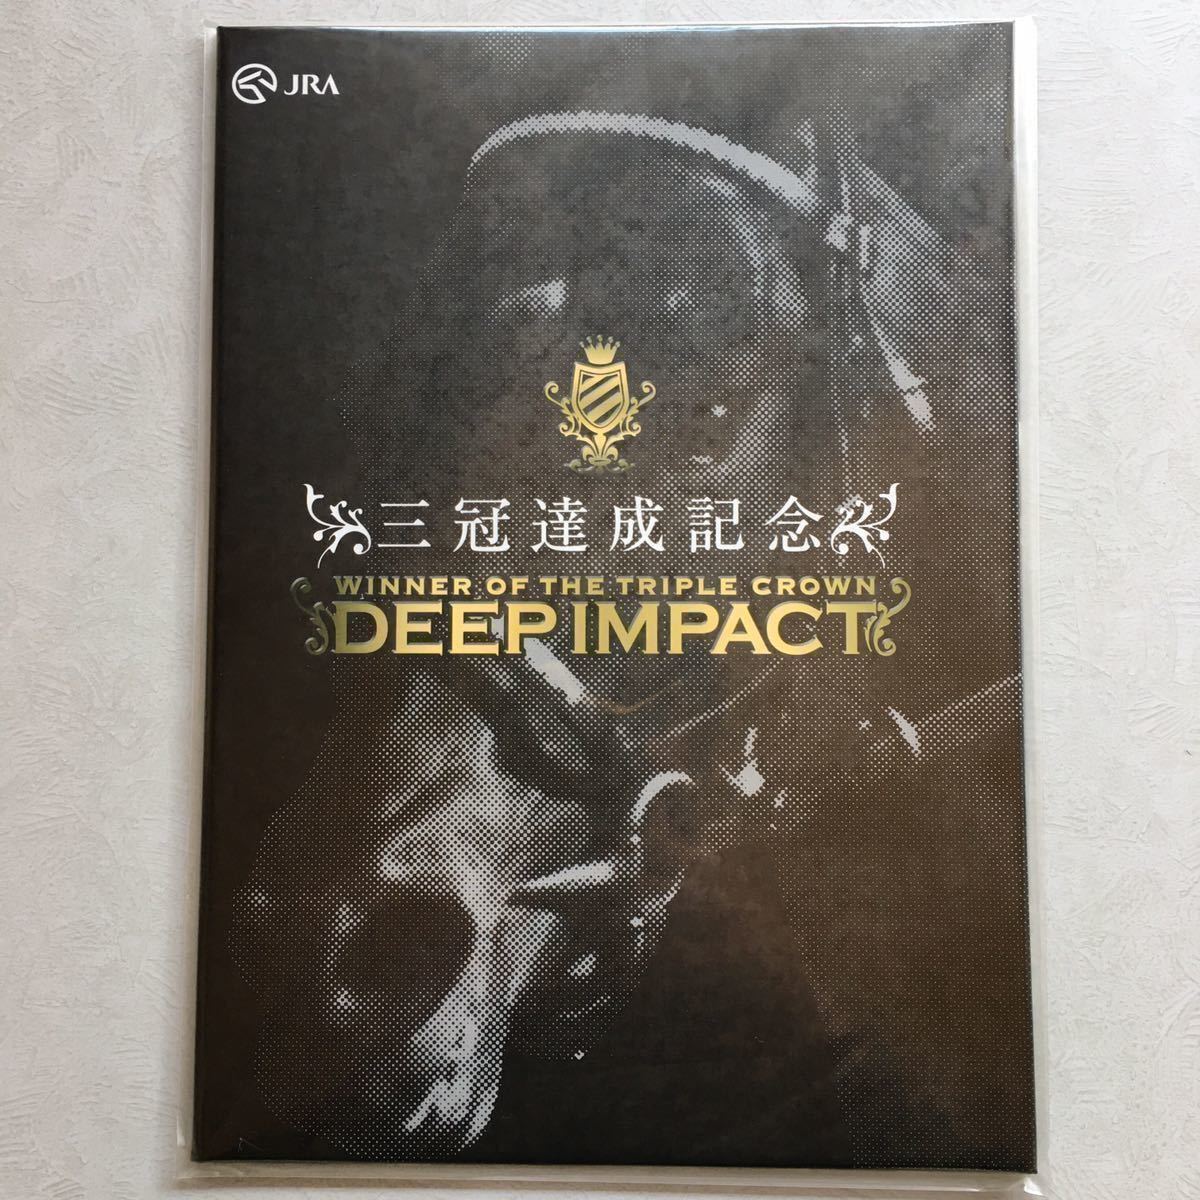  complete unopened rare limited goods new goods unused [ stamp deep impact DEEP INPACT three . achievement memory ] commemorative stamp seat ..JRA horse racing 